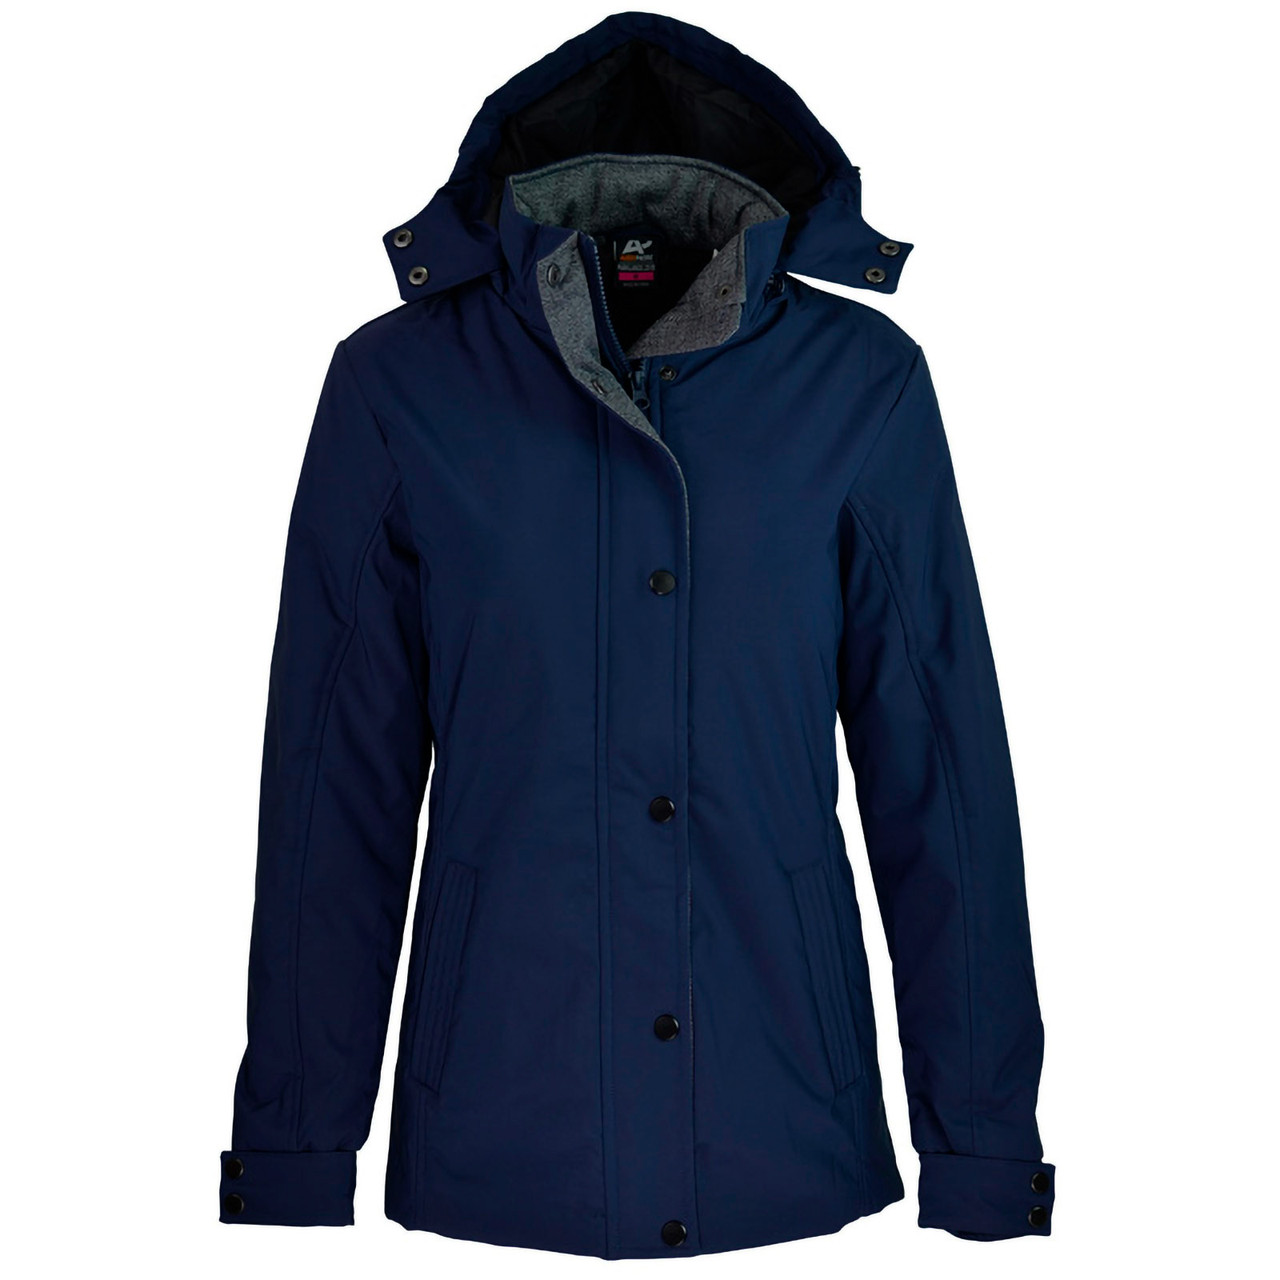 Ladies Water Proof Lightly Padded Jackets Online | Shop Plain Jackets ...